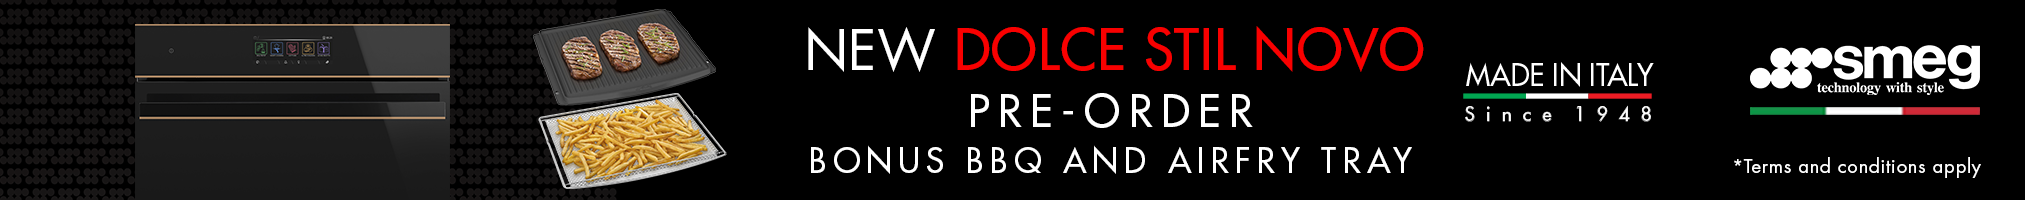 Pre-order An Eligible Dolce Stil Novo Oven & Receive Bonus BBQ Tray & Airfry Tray Valued At $598